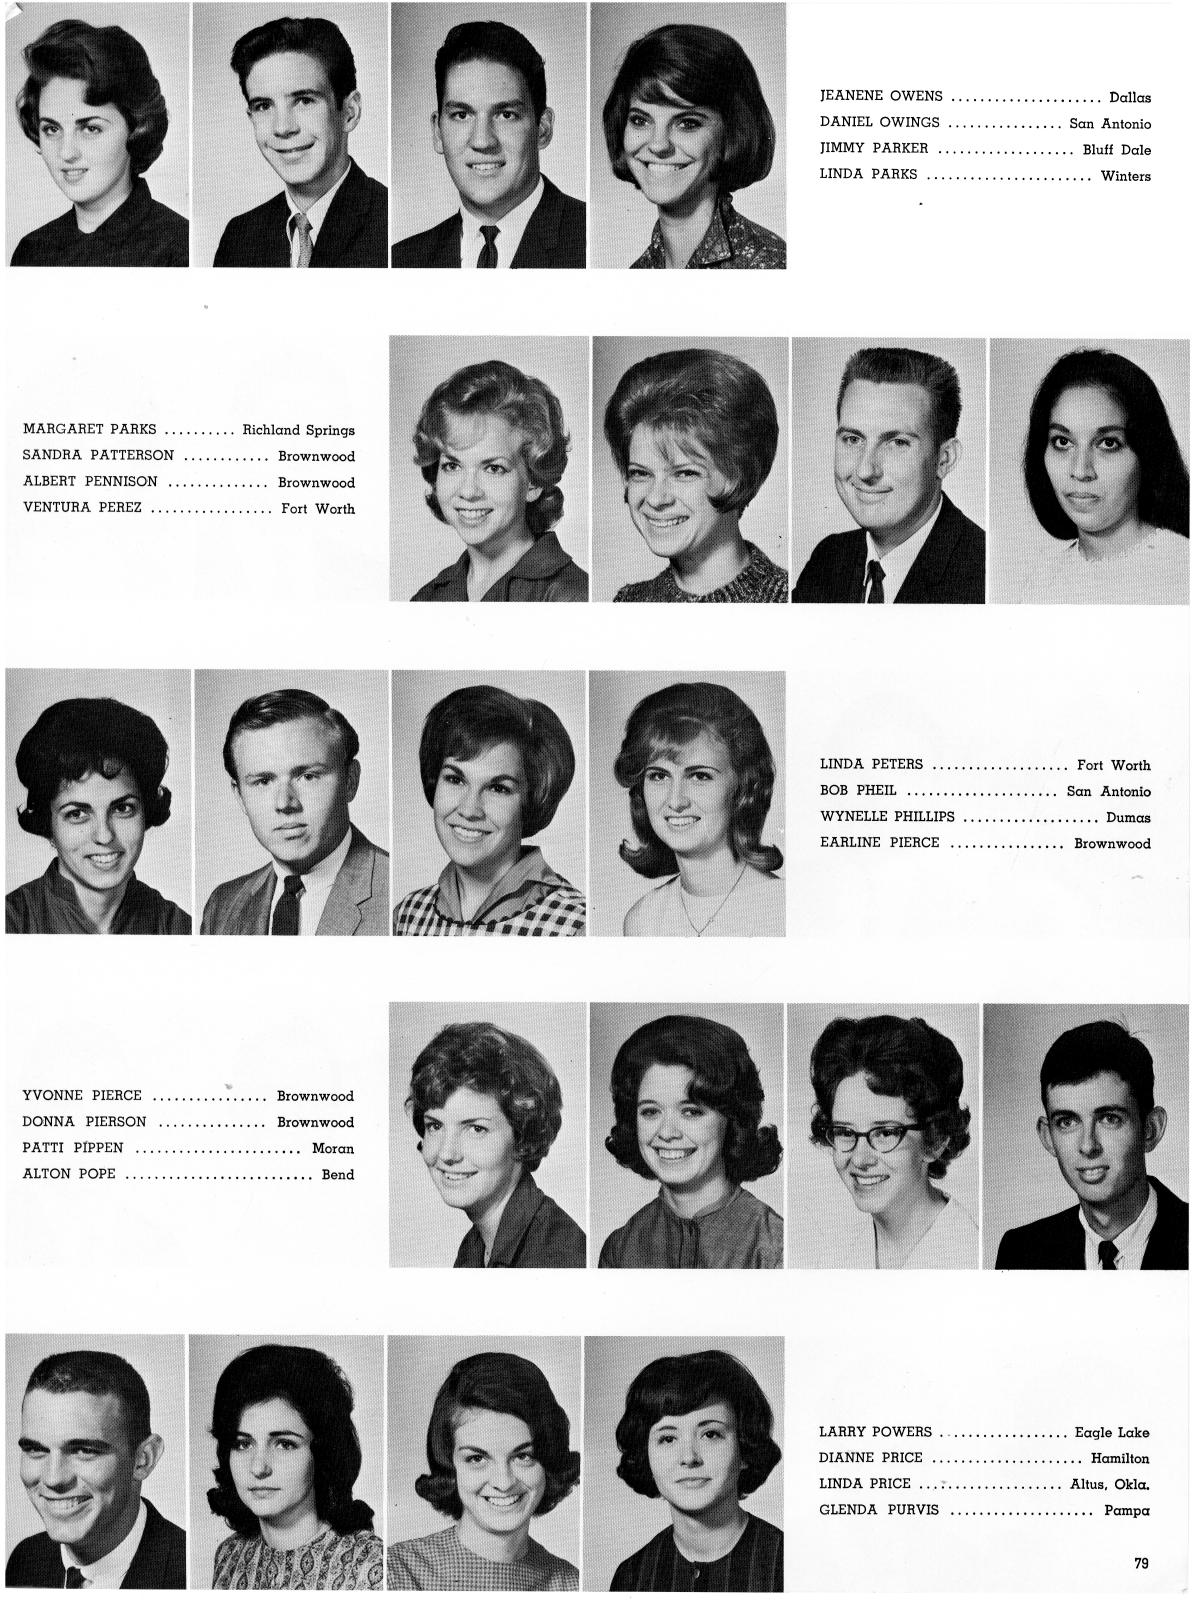 The Lasso, Yearbook of Howard Payne College, 1965
                                                
                                                    79
                                                